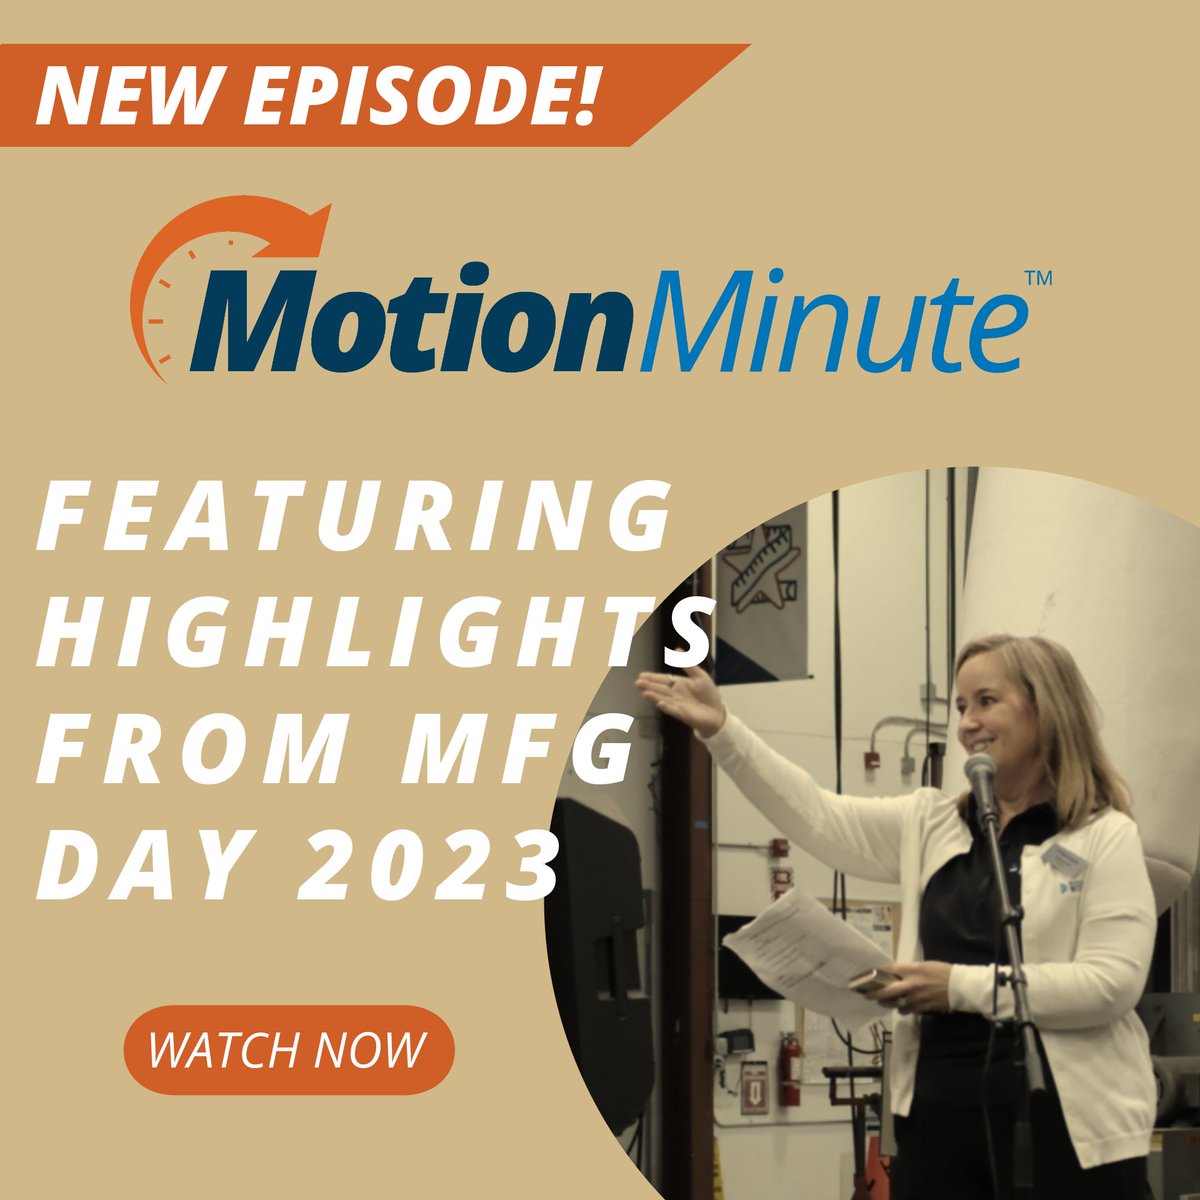 Introducing our NEW Motion Minute™ episode featuring the highlights of #MFGDay23. BW's president, Pamela Kan, delivered an inspiring speech to the kids.

🎥Watch now: motionminute.bwc.com

#MotionMinute #Manufacturing #MFGDay23 #Engineering #KidsinSTEM